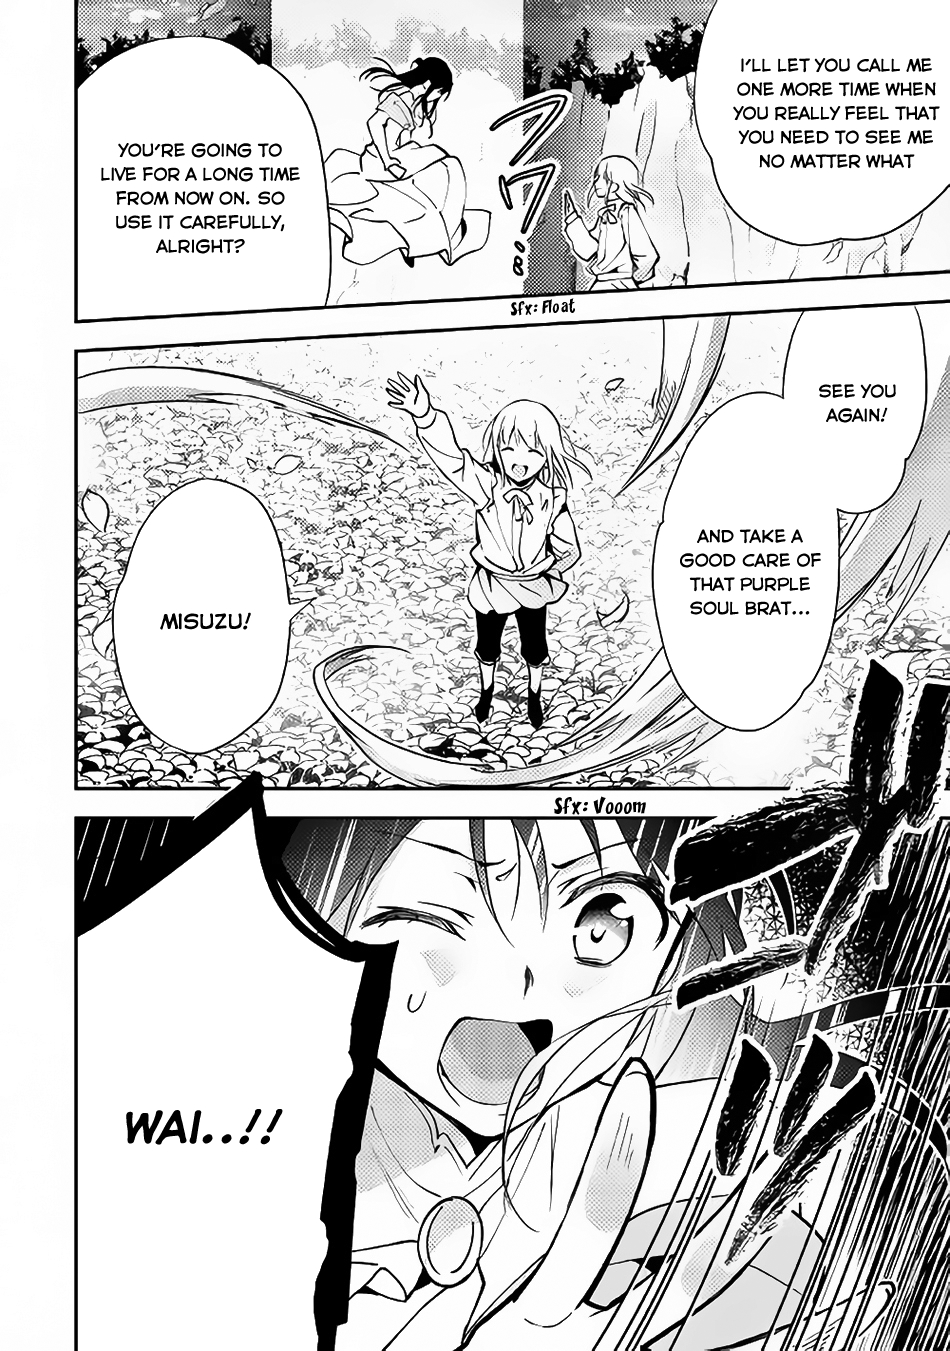 In Another World, I'm Called: the Black Healer Vol. 5 Ch. 34